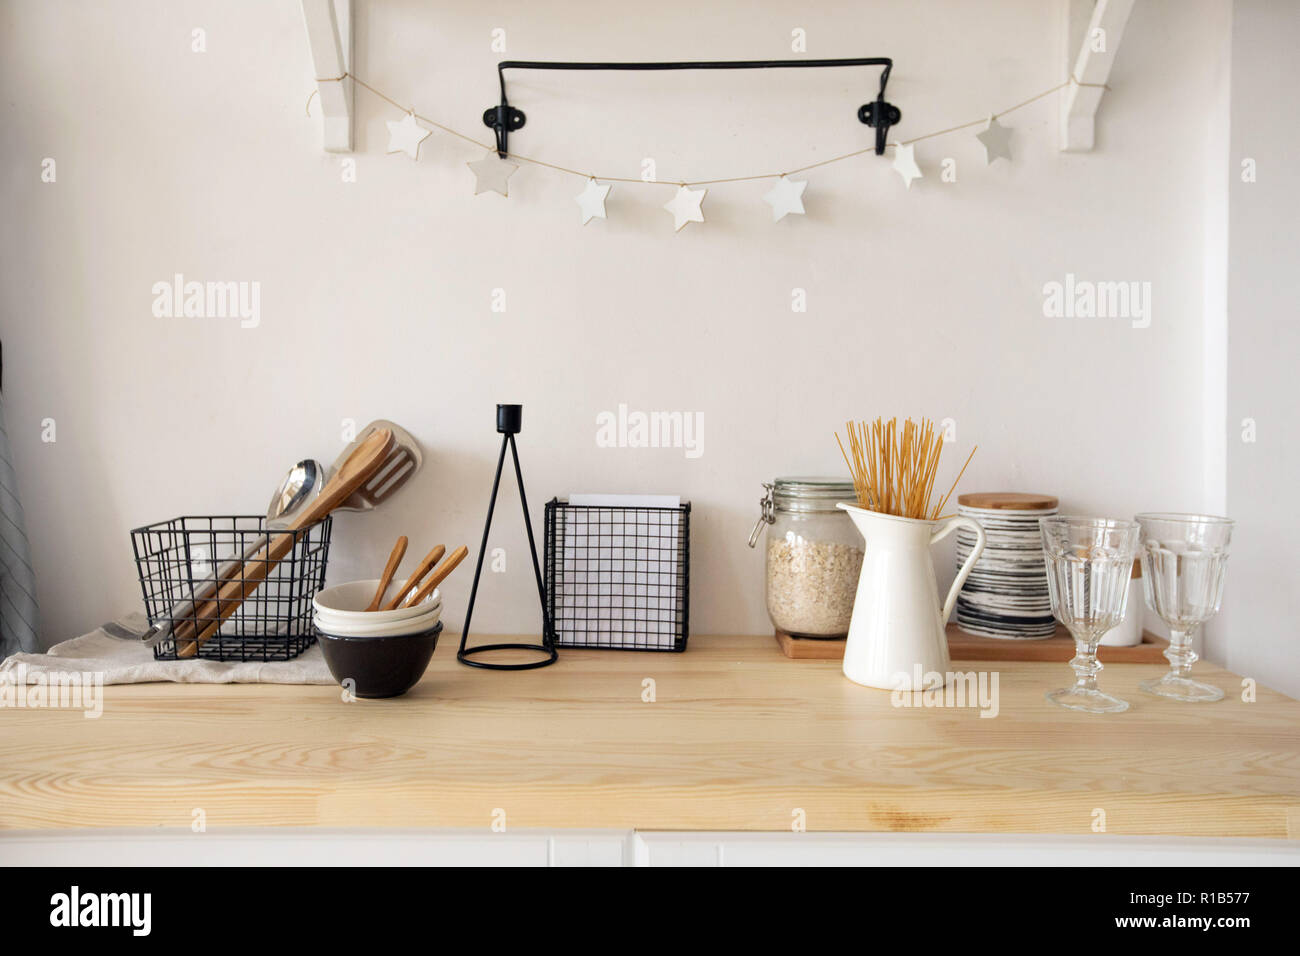 Furniture and dishware in kitchen Stock Photo